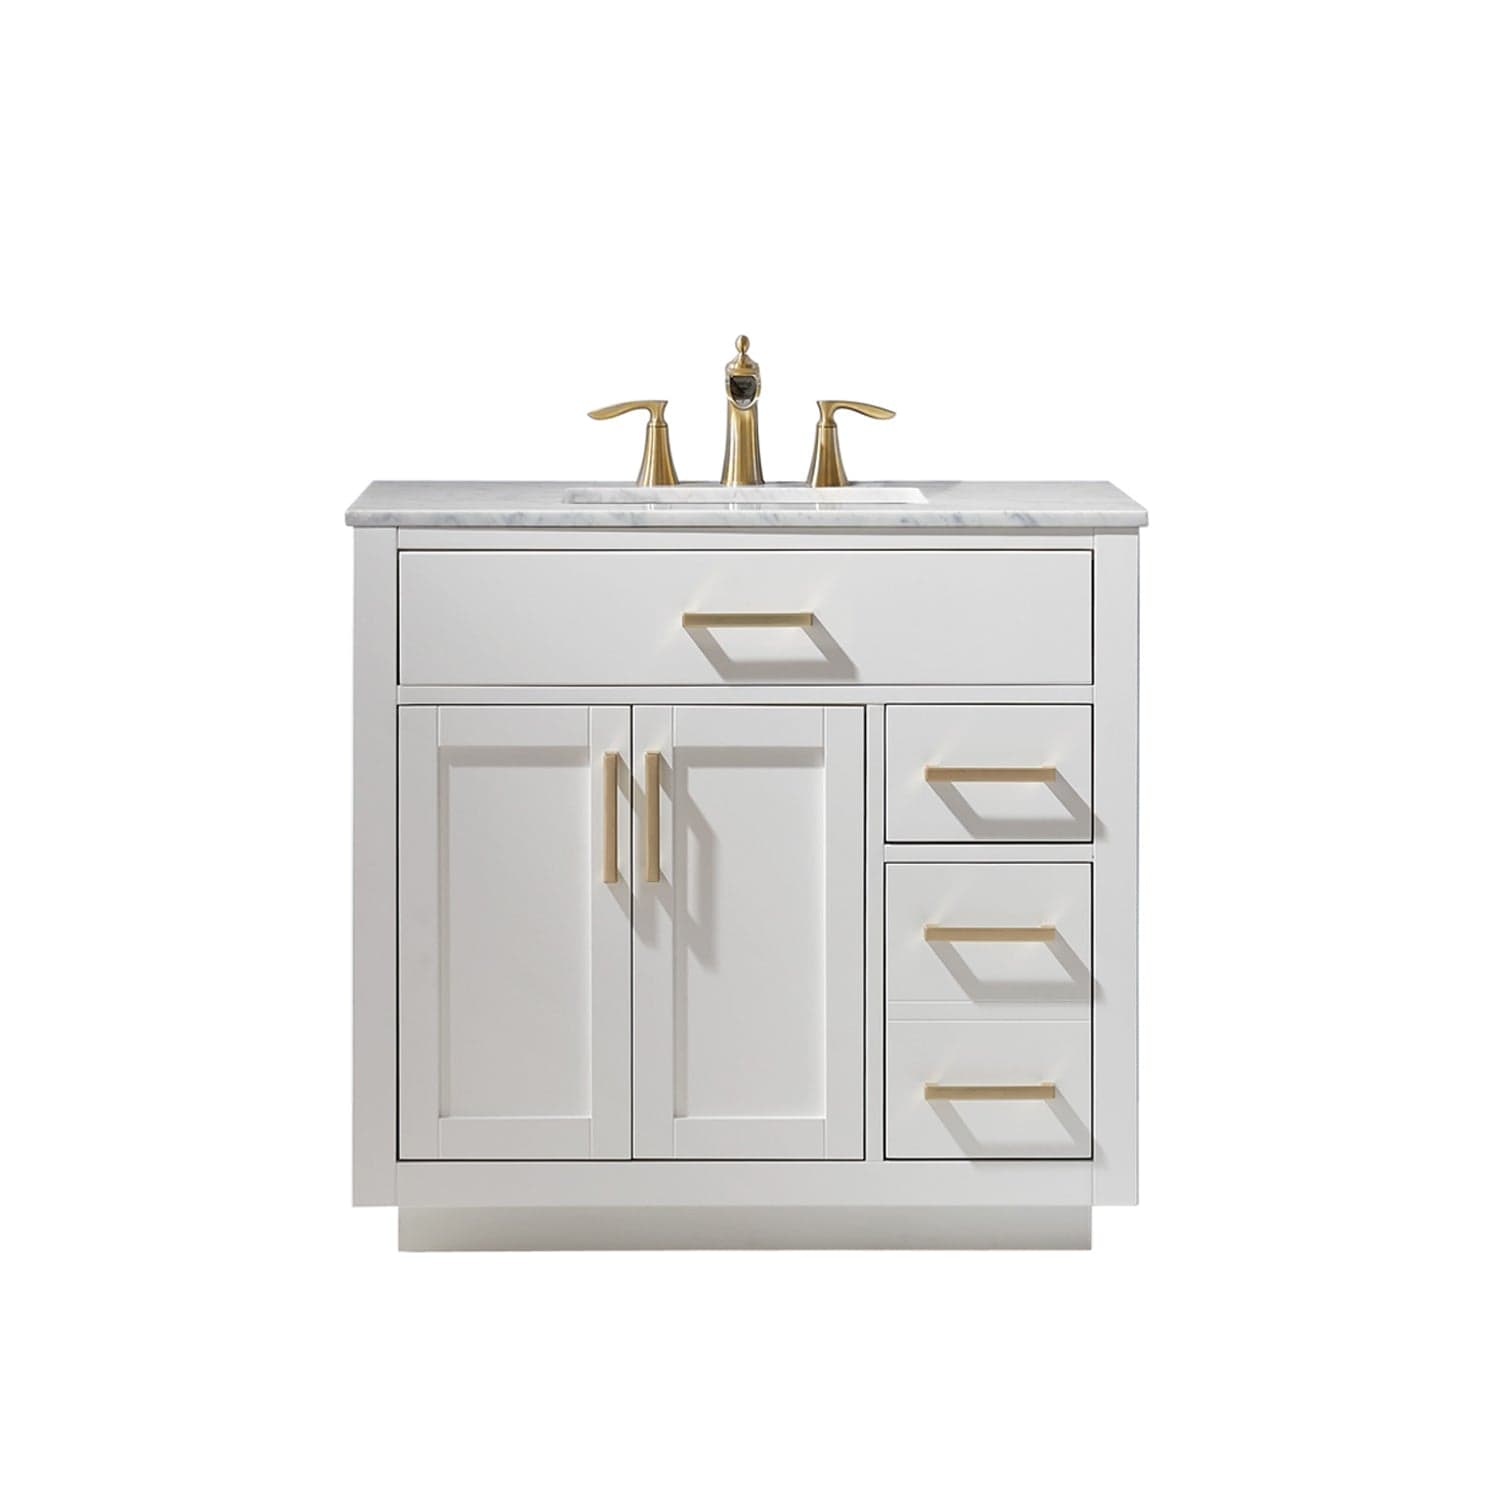 Altair Ivy 36" Single Bathroom Vanity Set in White and Carrara White Marble Countertop without Mirror 531036-WH-CA-NM - Molaix631112971140Vanity531036-WH-CA-NM